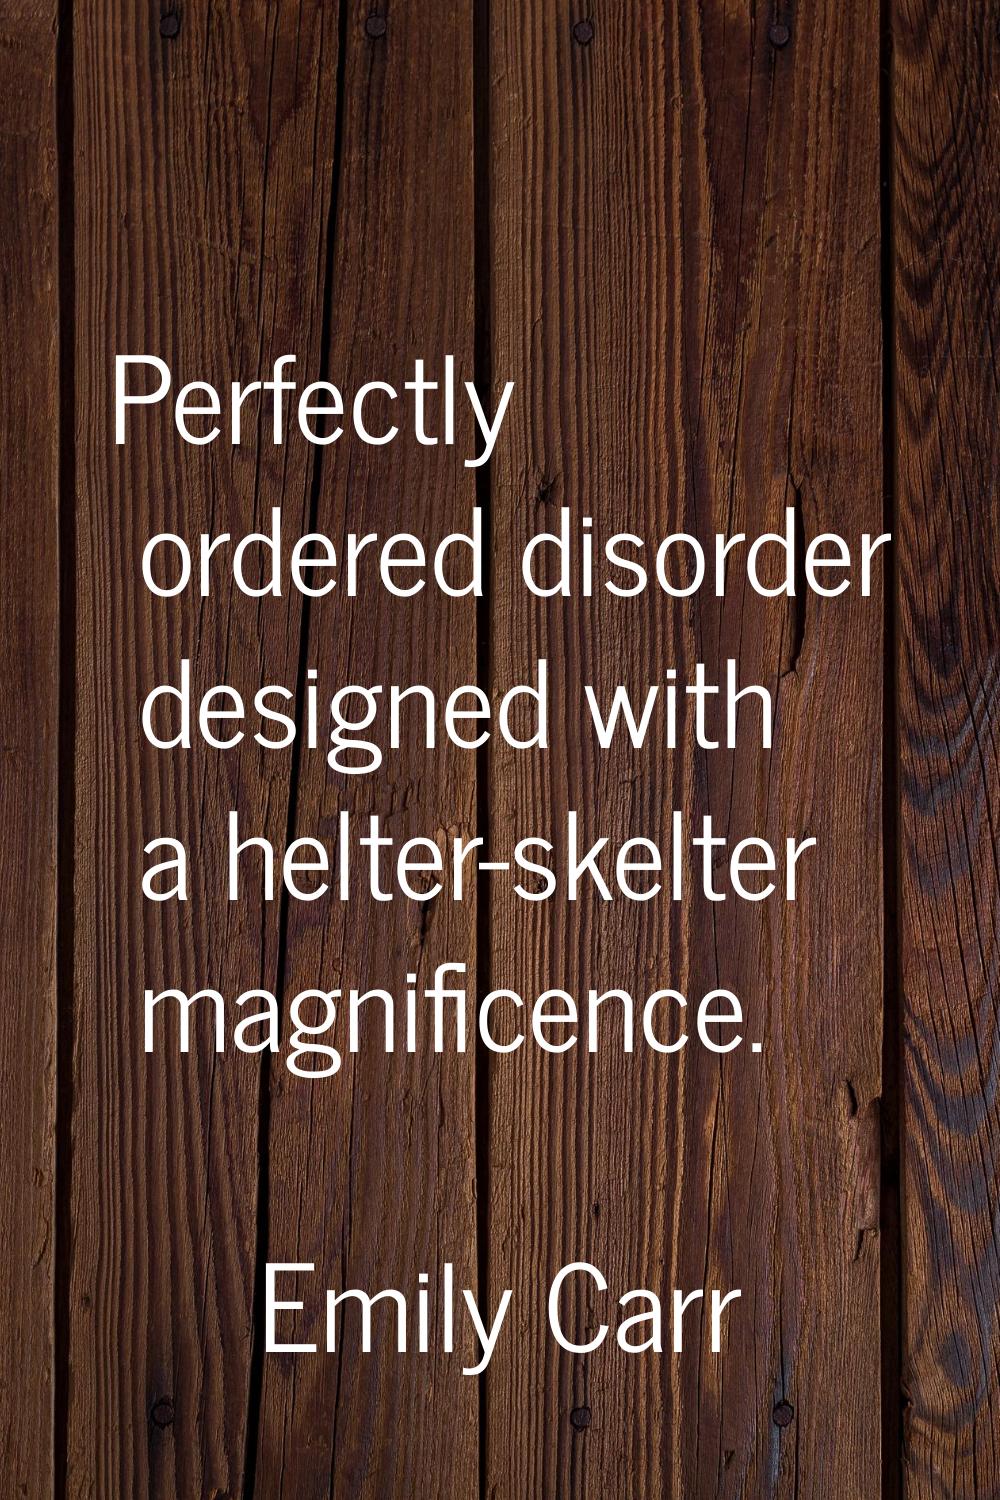 Perfectly ordered disorder designed with a helter-skelter magnificence.